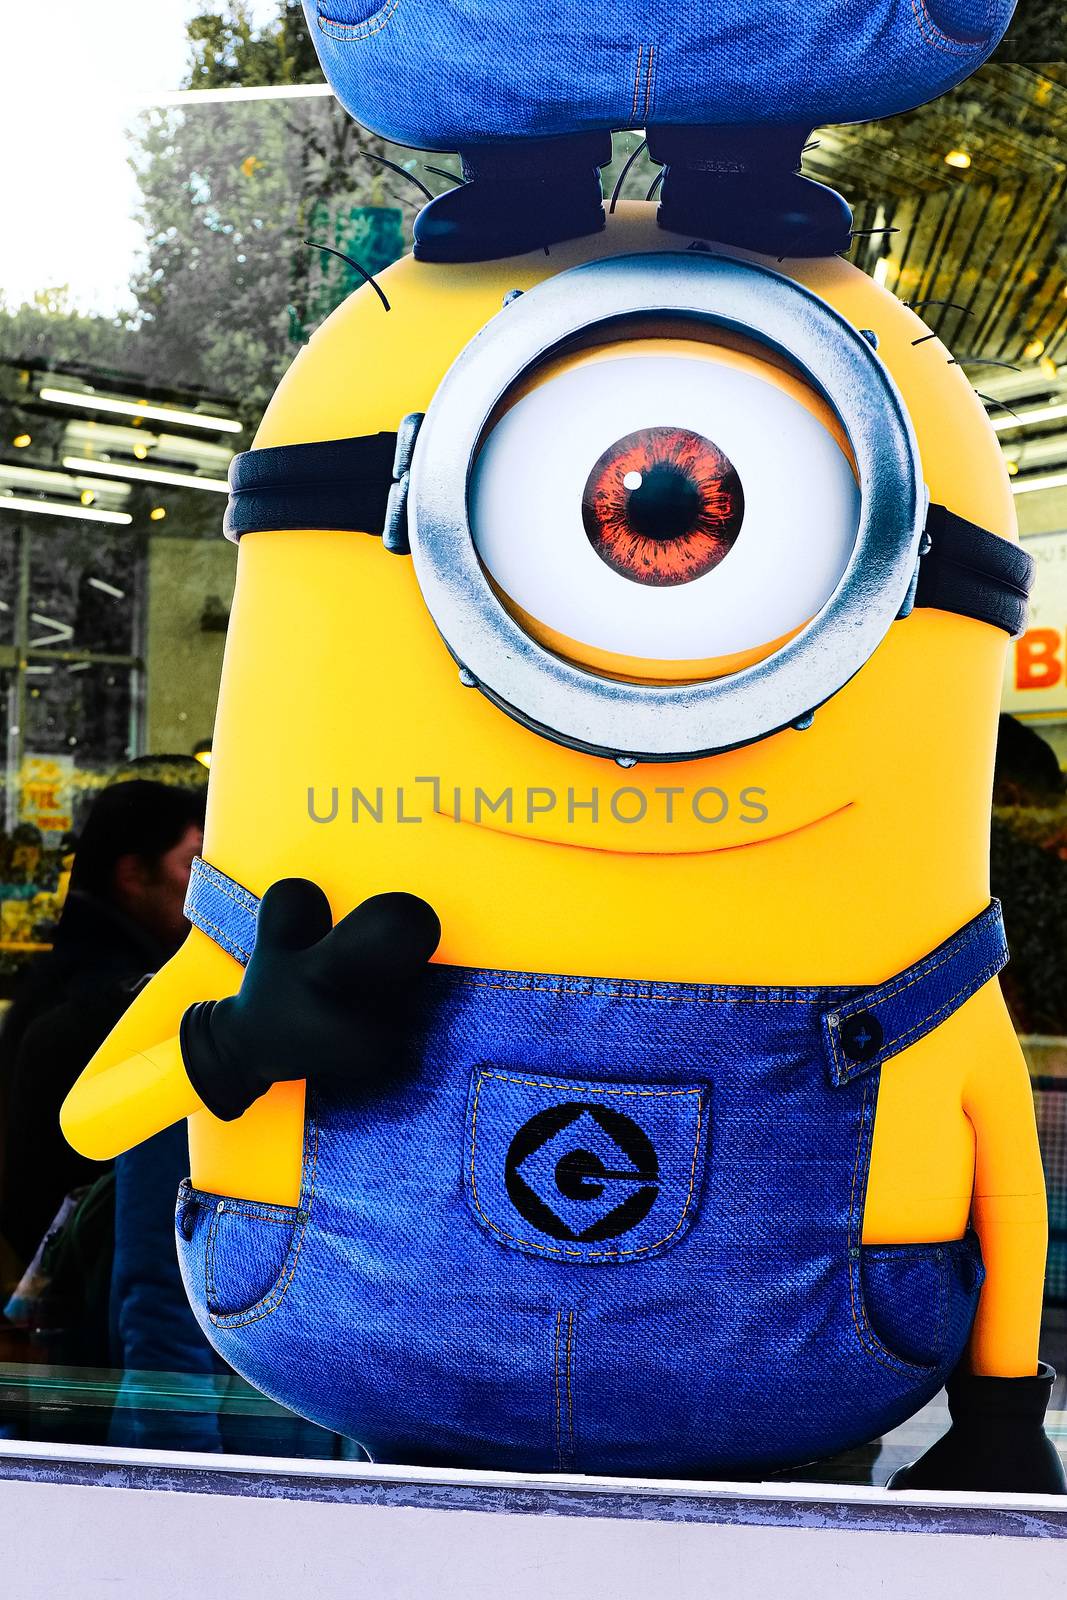 OSAKA, JAPAN - Jan 07, 2020 : Sign of 'MINION PARK', located in Universal Studios JAPAN, Osaka, Japan. Minions are famous character from Despicable Me animation. by USA-TARO